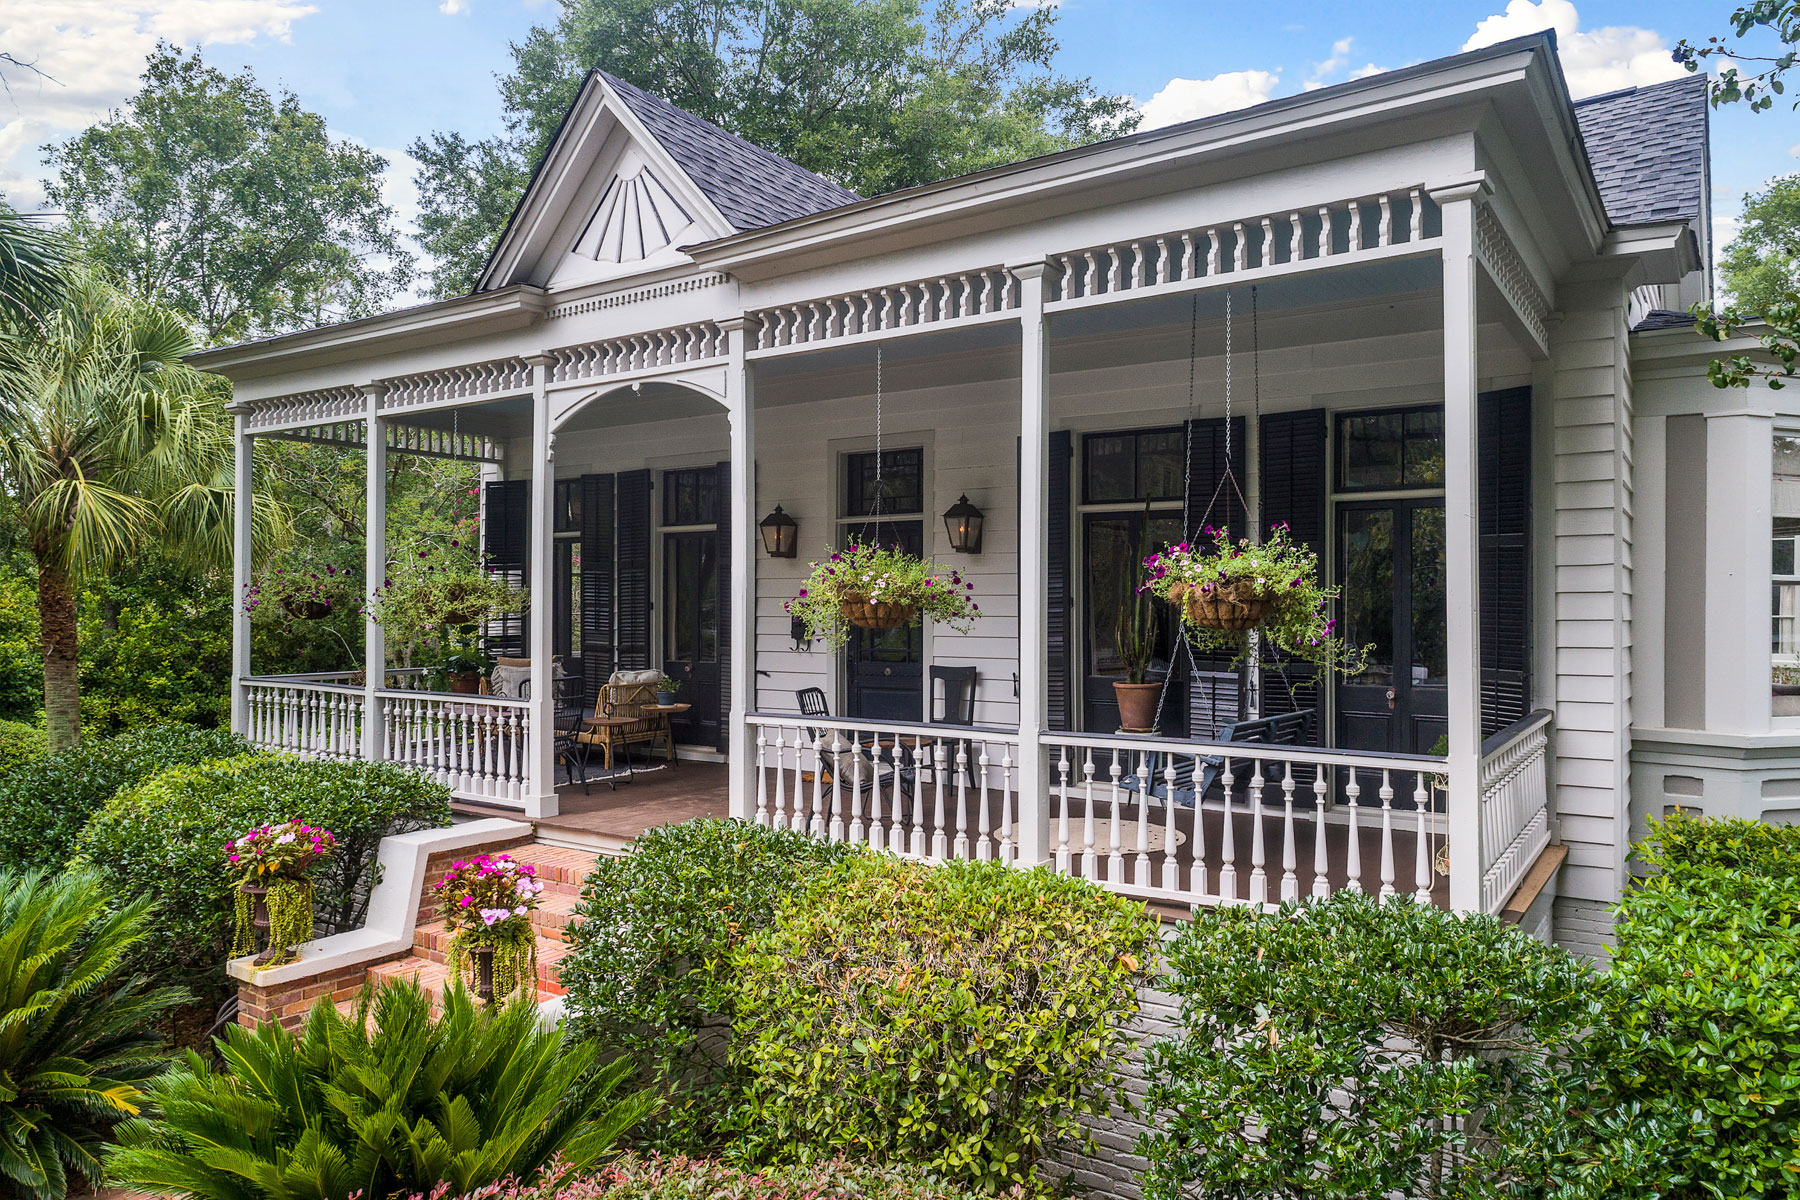 Whole house renovation in Historic Downtown Summerville, SC designed by Swallowtail Architecture